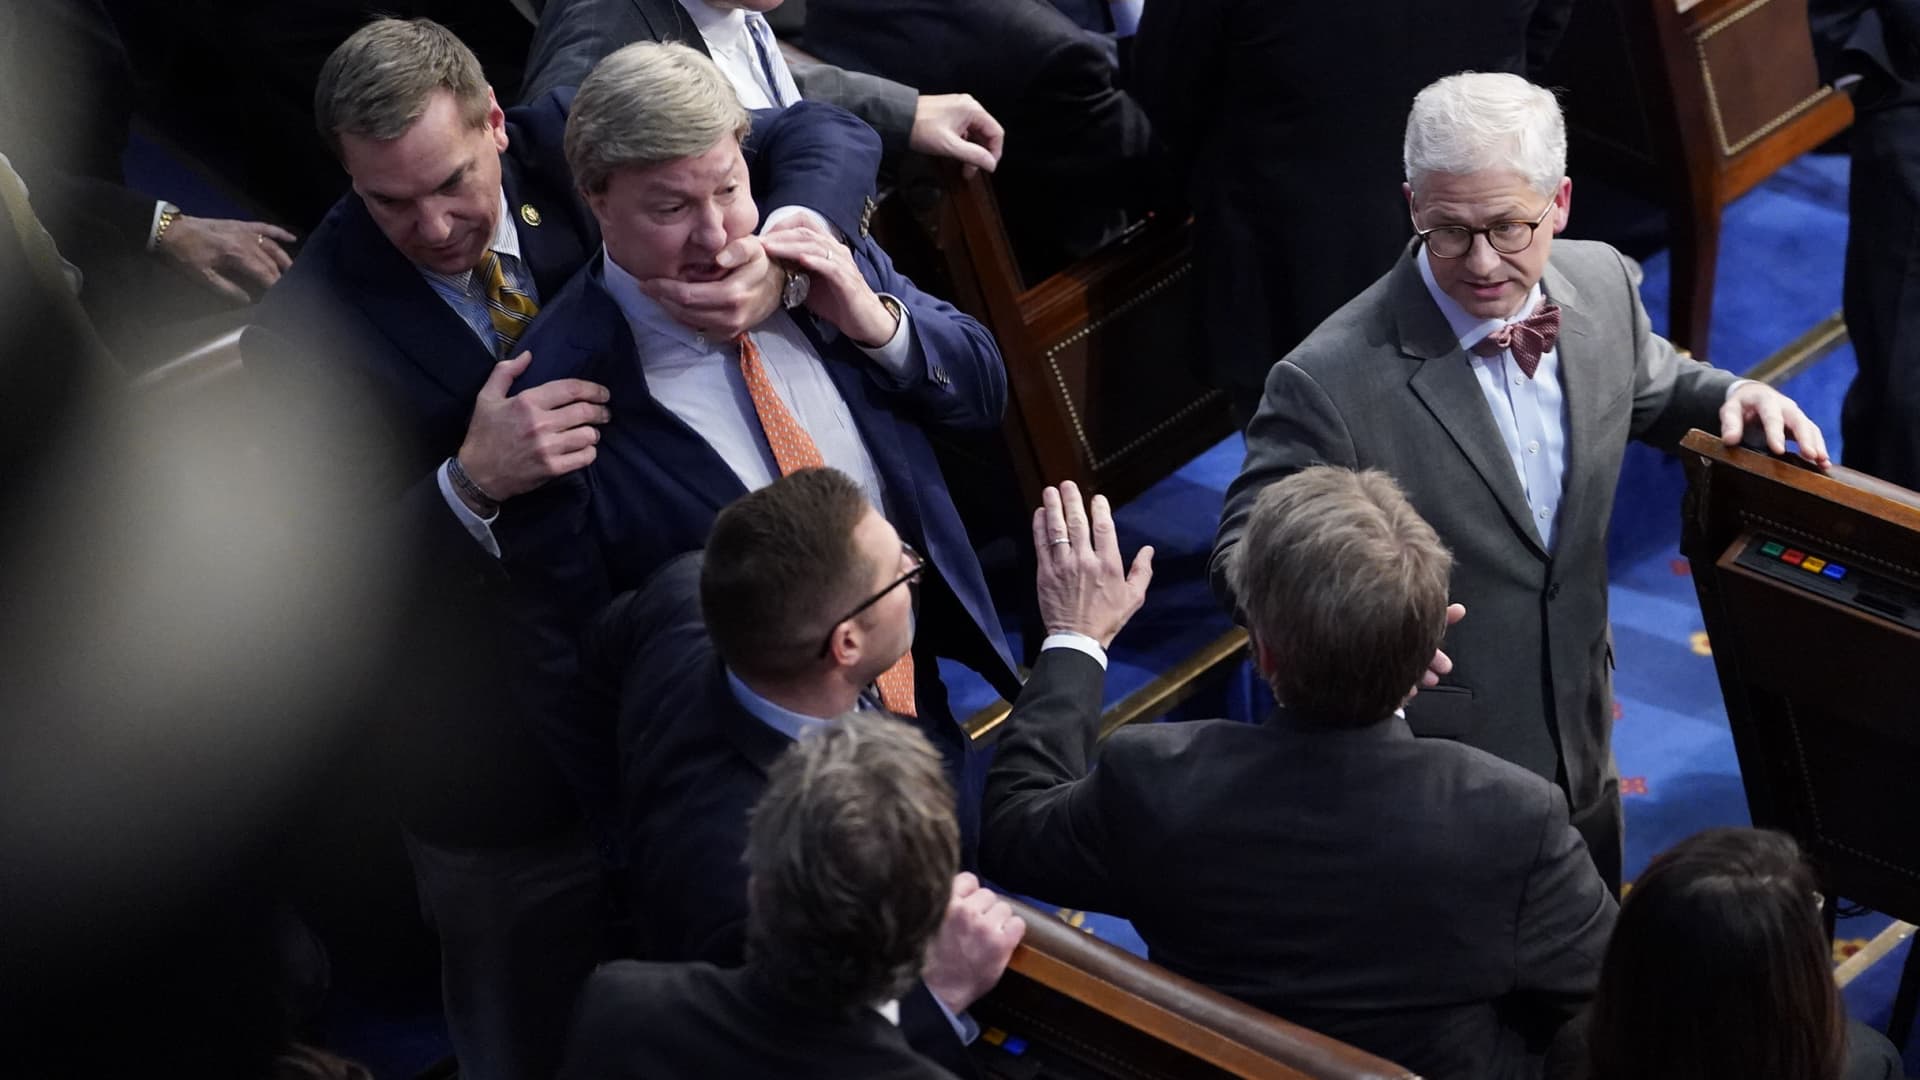 Washington , D.C.- January 6:Mike Rogers (R-AL) is restrained after getting into an argument with Matt Gaetz (R-FL) during in the 14th round of voting for speaker in a meeting of the 118th Congress, Friday, January 6, 2023, at the U.S. Capitol in Washington DC.The House reconvened Friday night after adjourning earlier for a fourth day of voting after Rep.-elect Kevin McCarthy failed to earn more than 218 votes on 11 ballots over three days. (Photo by Jabin Botsford/The Washington Post via Getty Images)